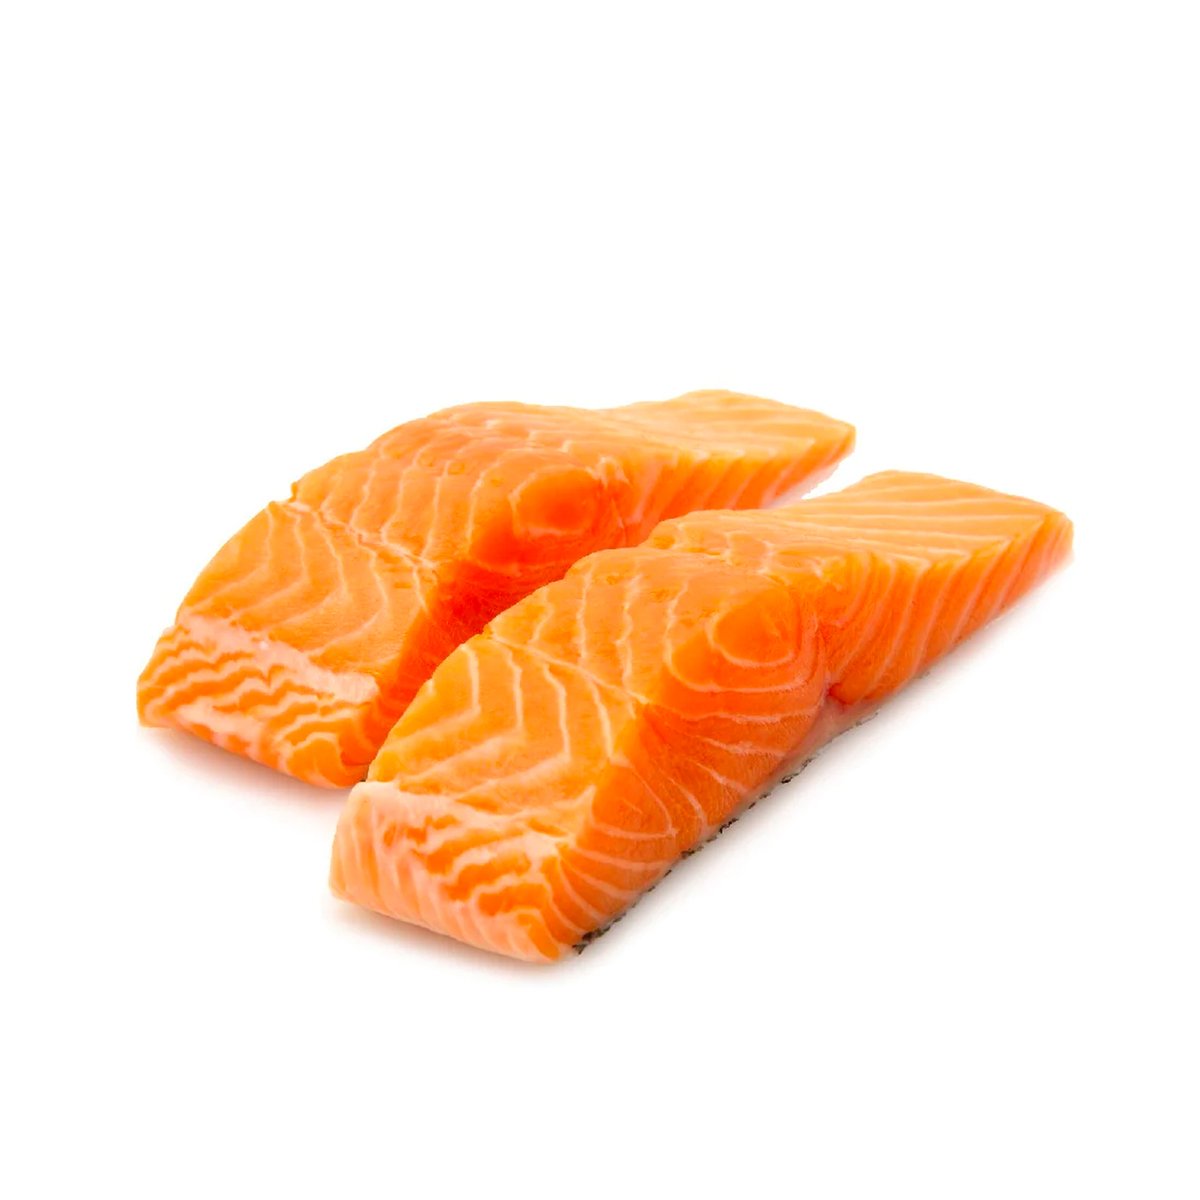 Salmon Fillet 250g Approx Weight